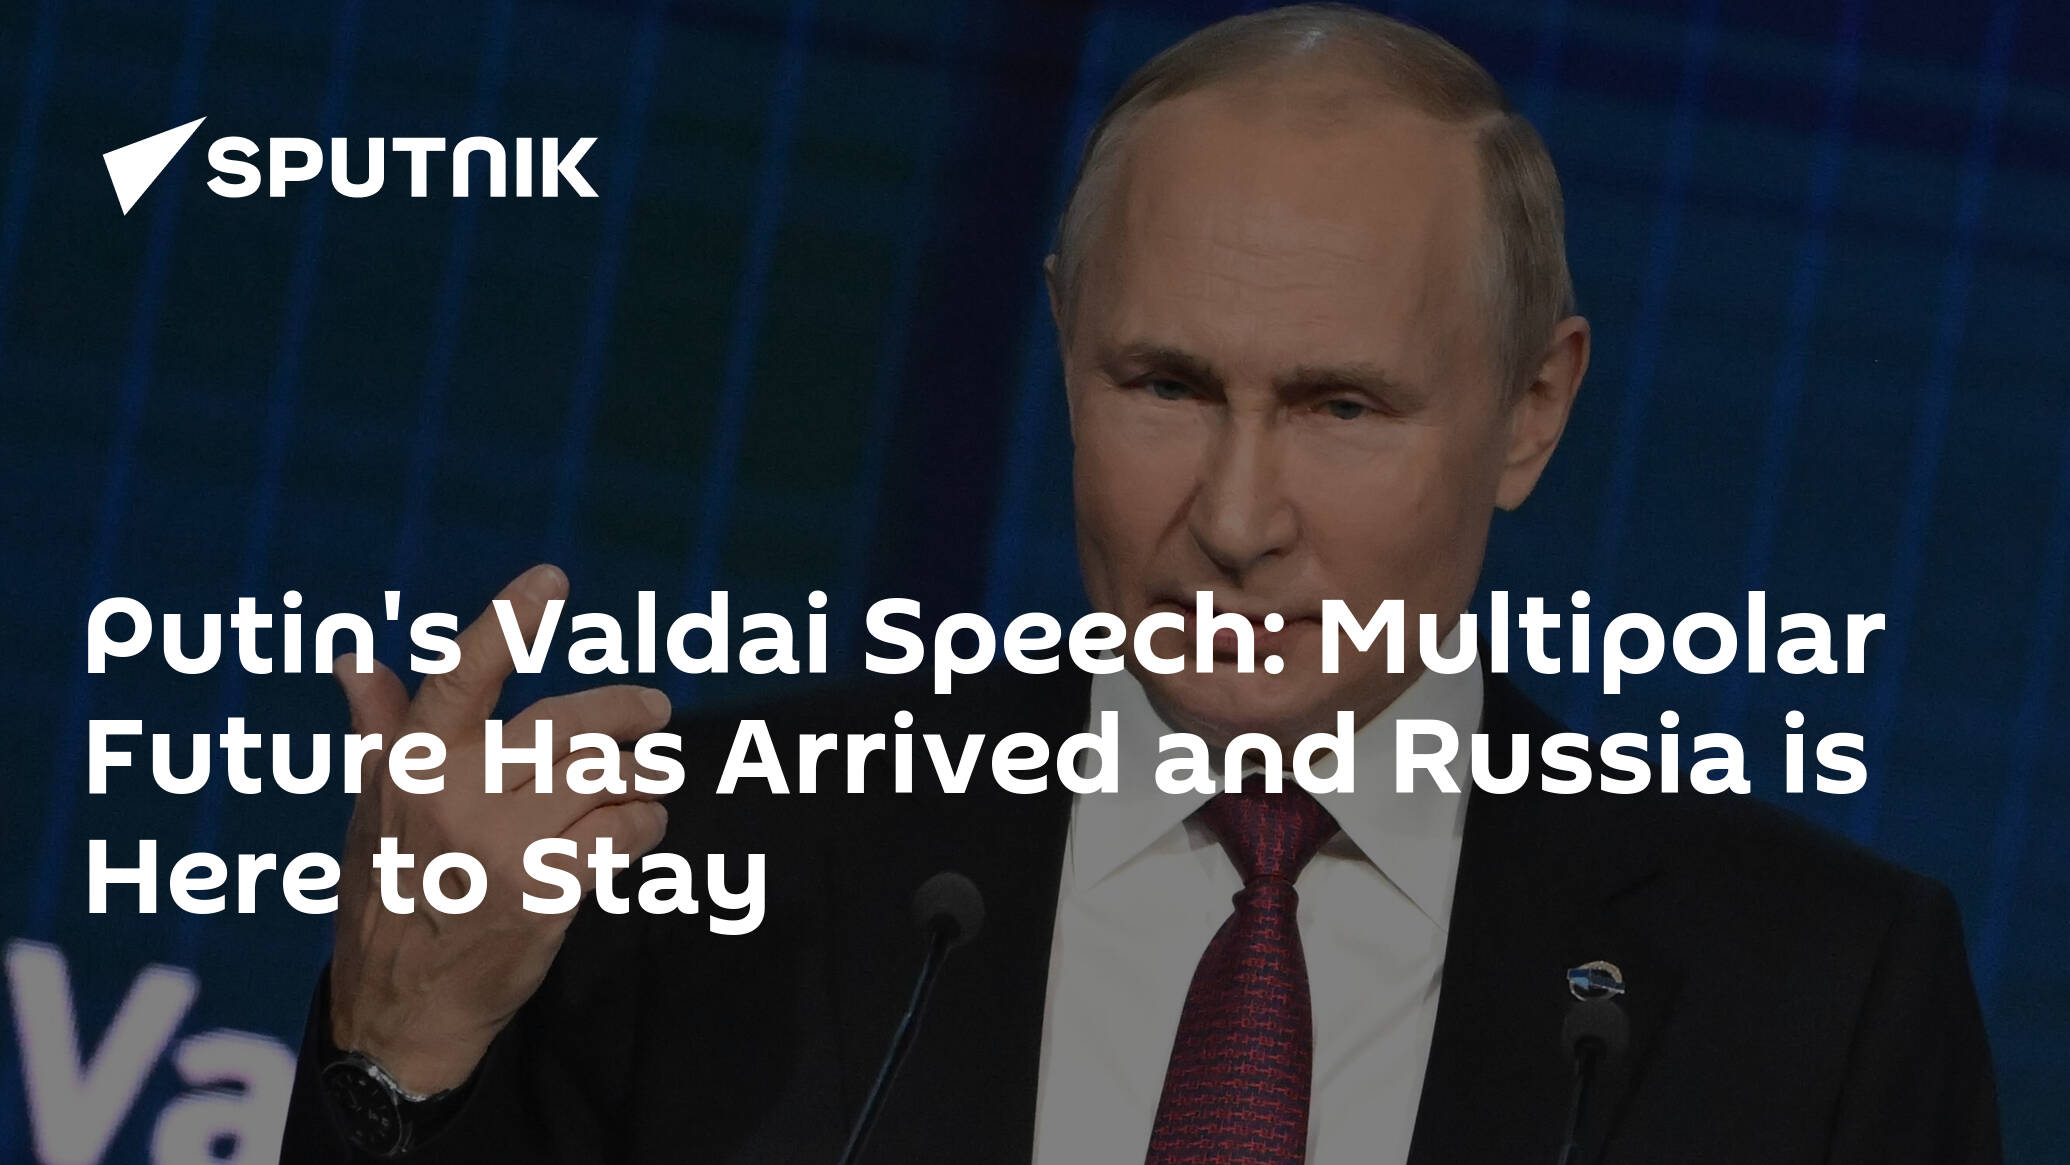 Putin's Valdai Speech: Multipolar Future Has Arrived and Russia is Here to Stay